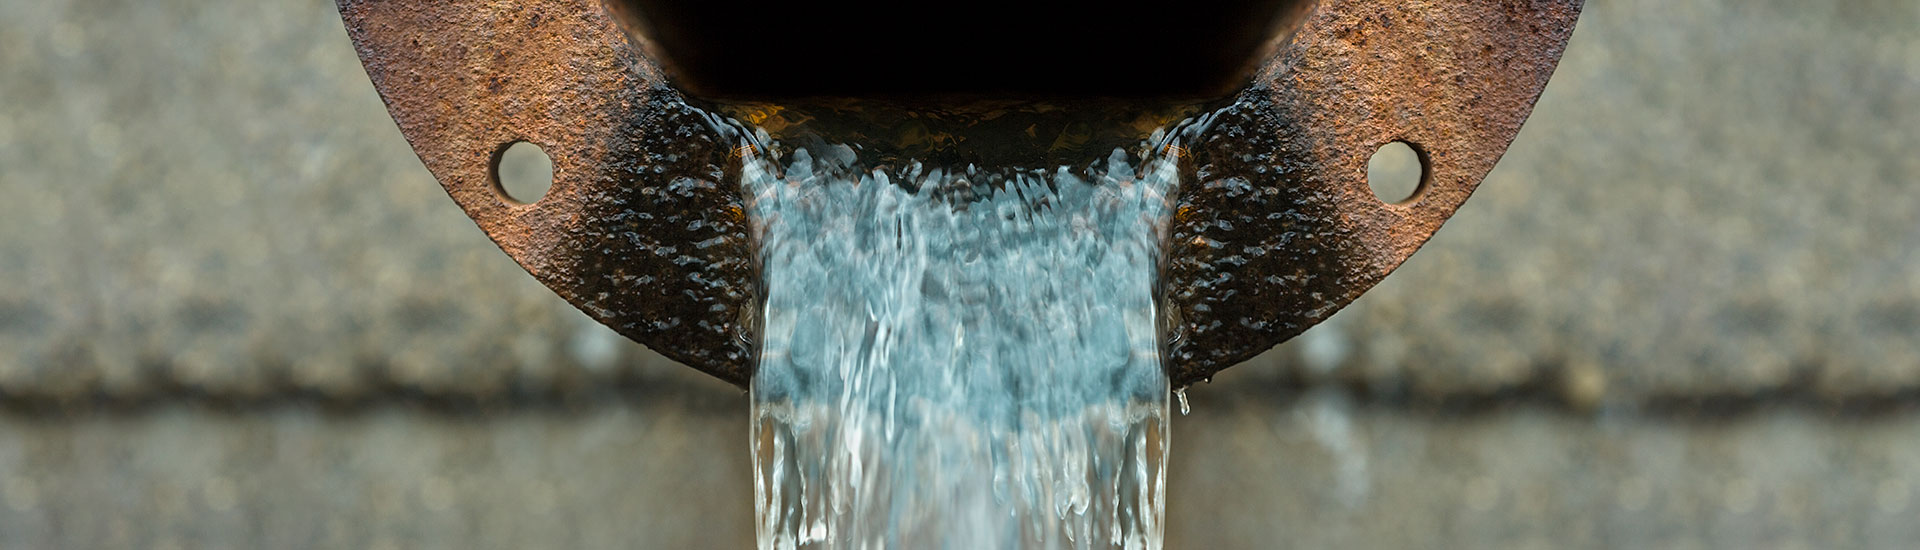 Photo: Wastewater flowing out of a pipe